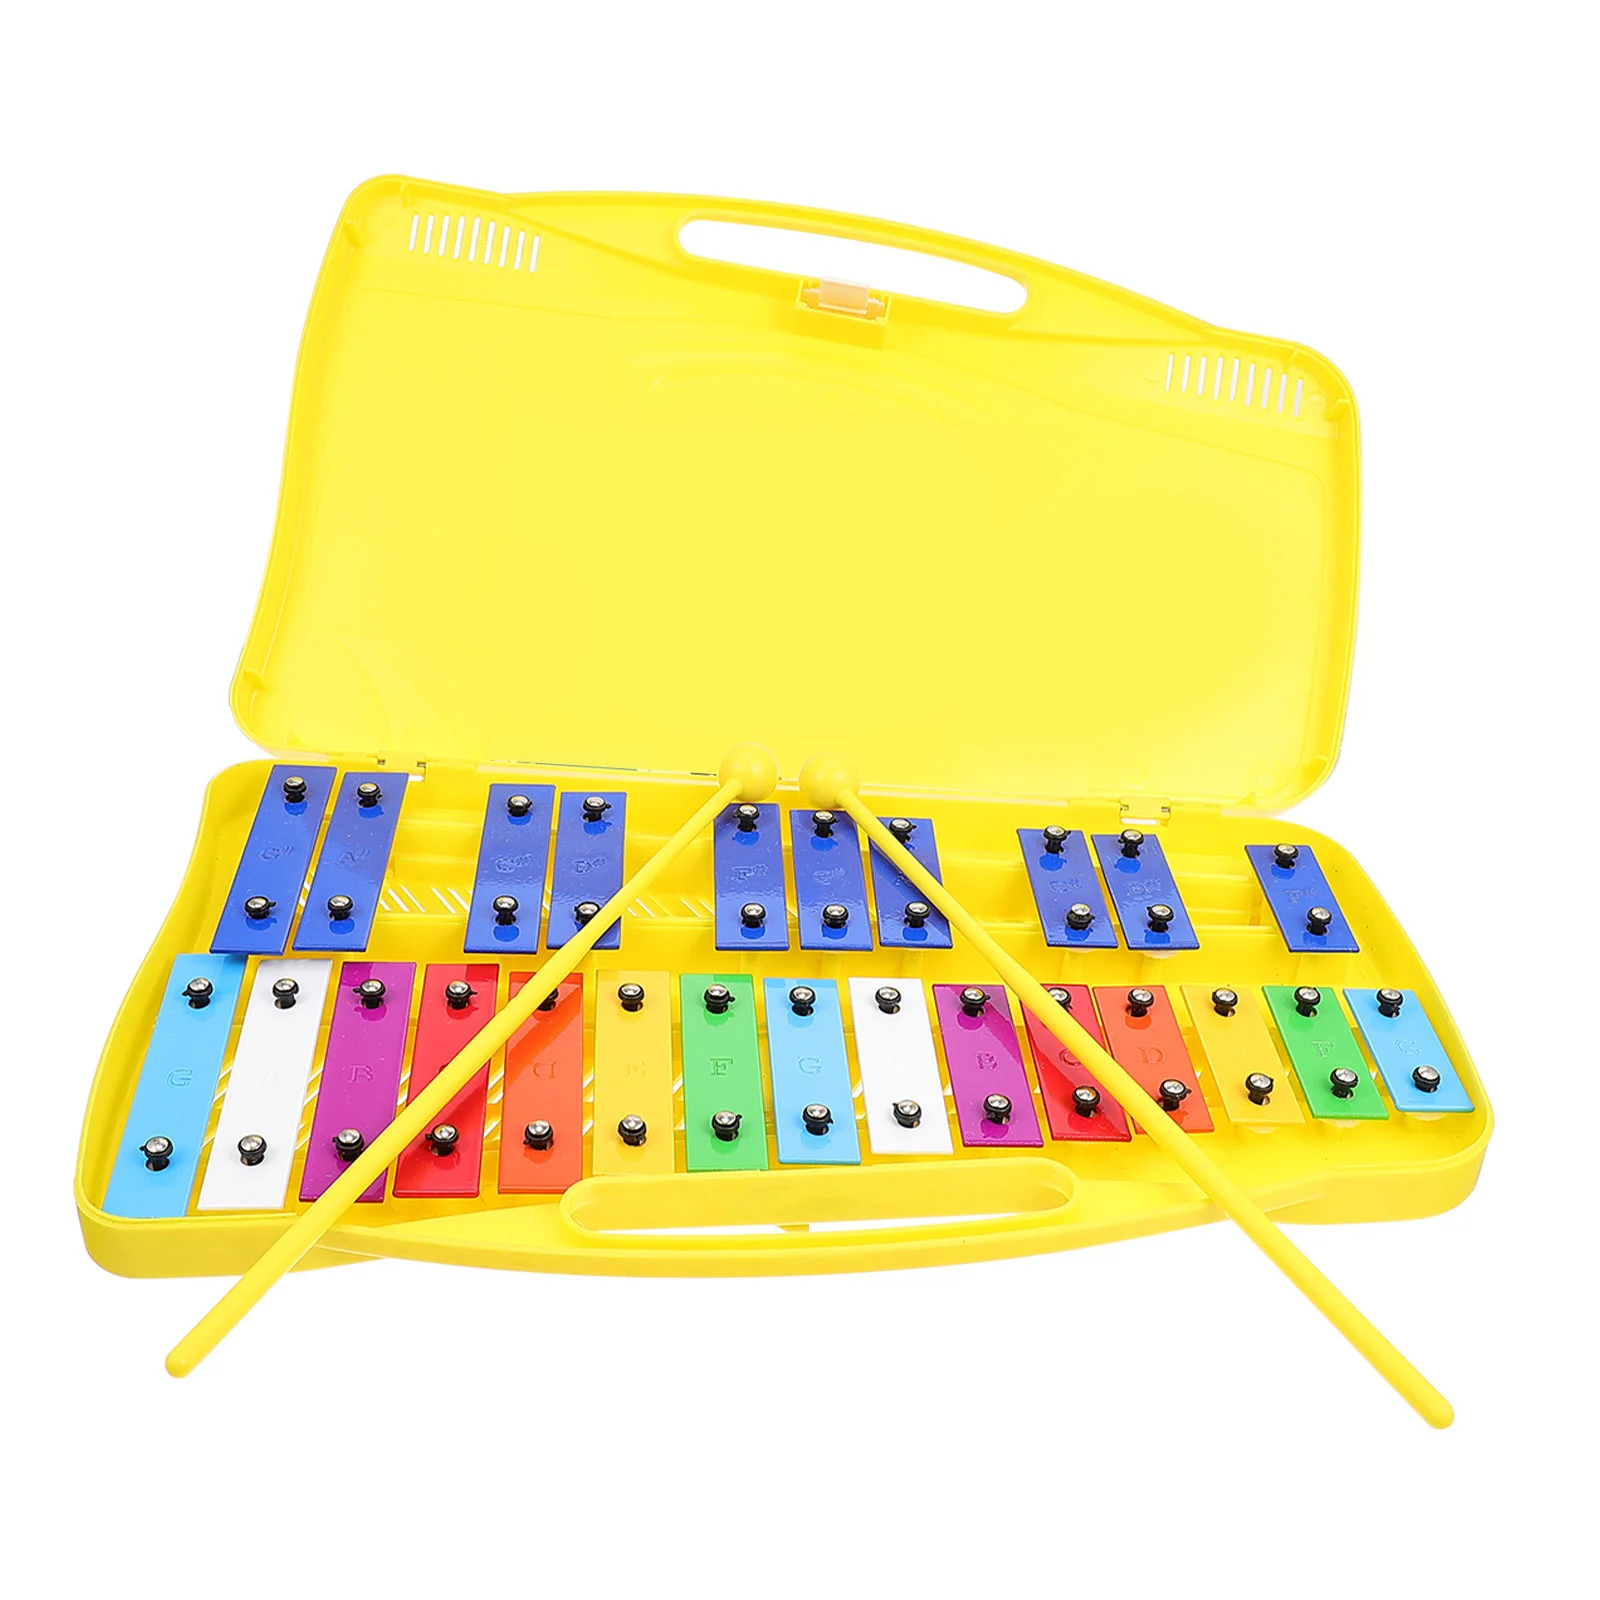 

25-tone Piano Playing Musical Toy For Kids Plastic Percussion Orff Instrument Metal Toddler Wooden Toys Metallophone Xylophone